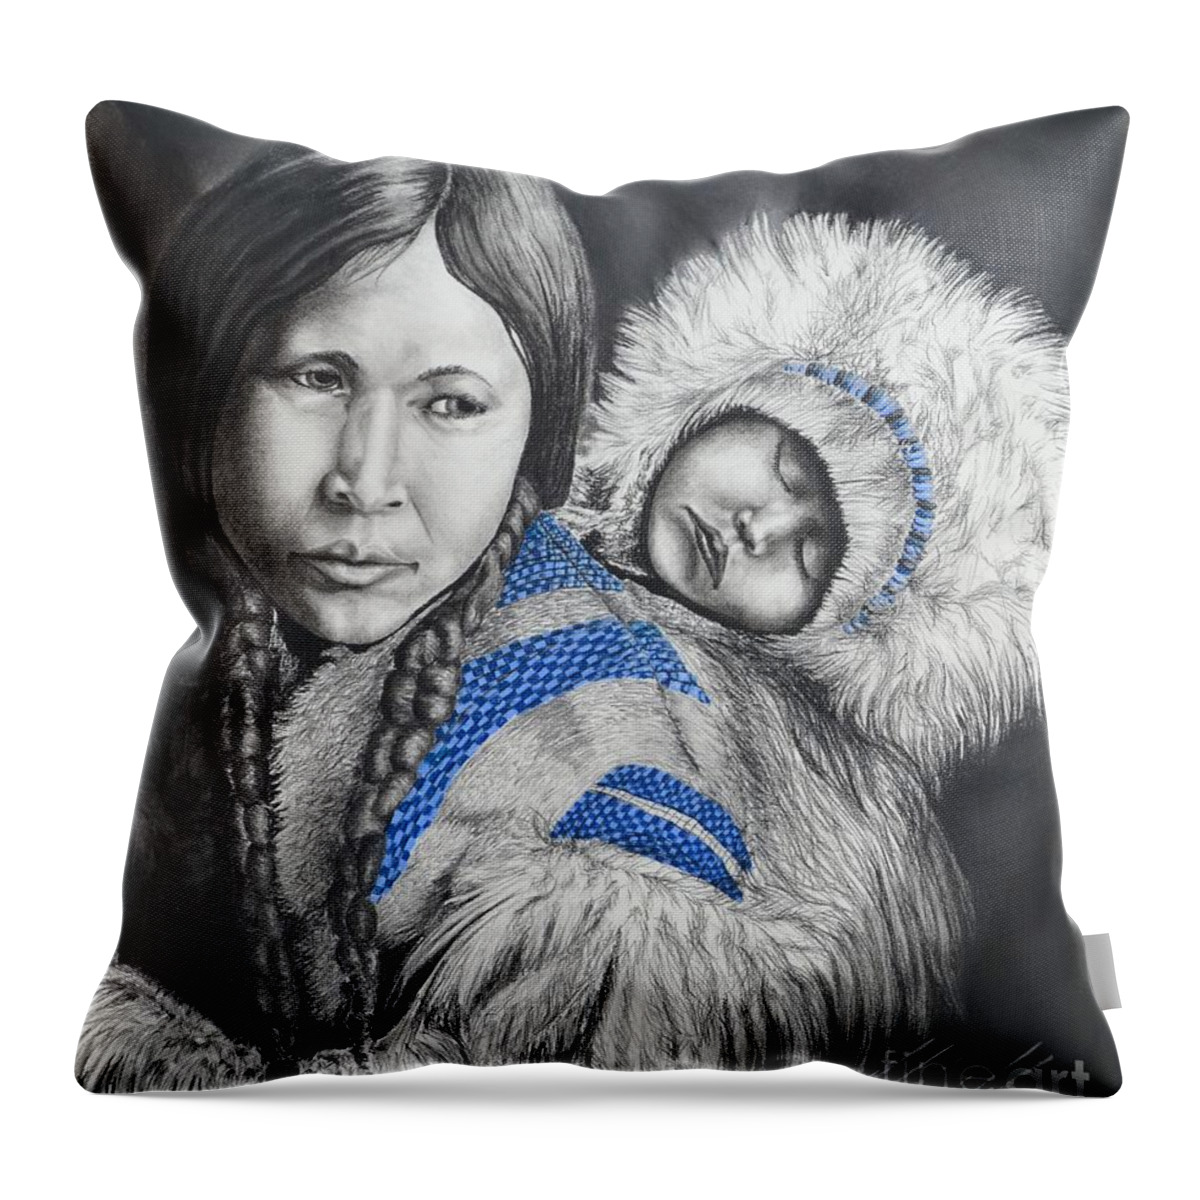 Native American Throw Pillow featuring the mixed media Papoosse by John Huntsman